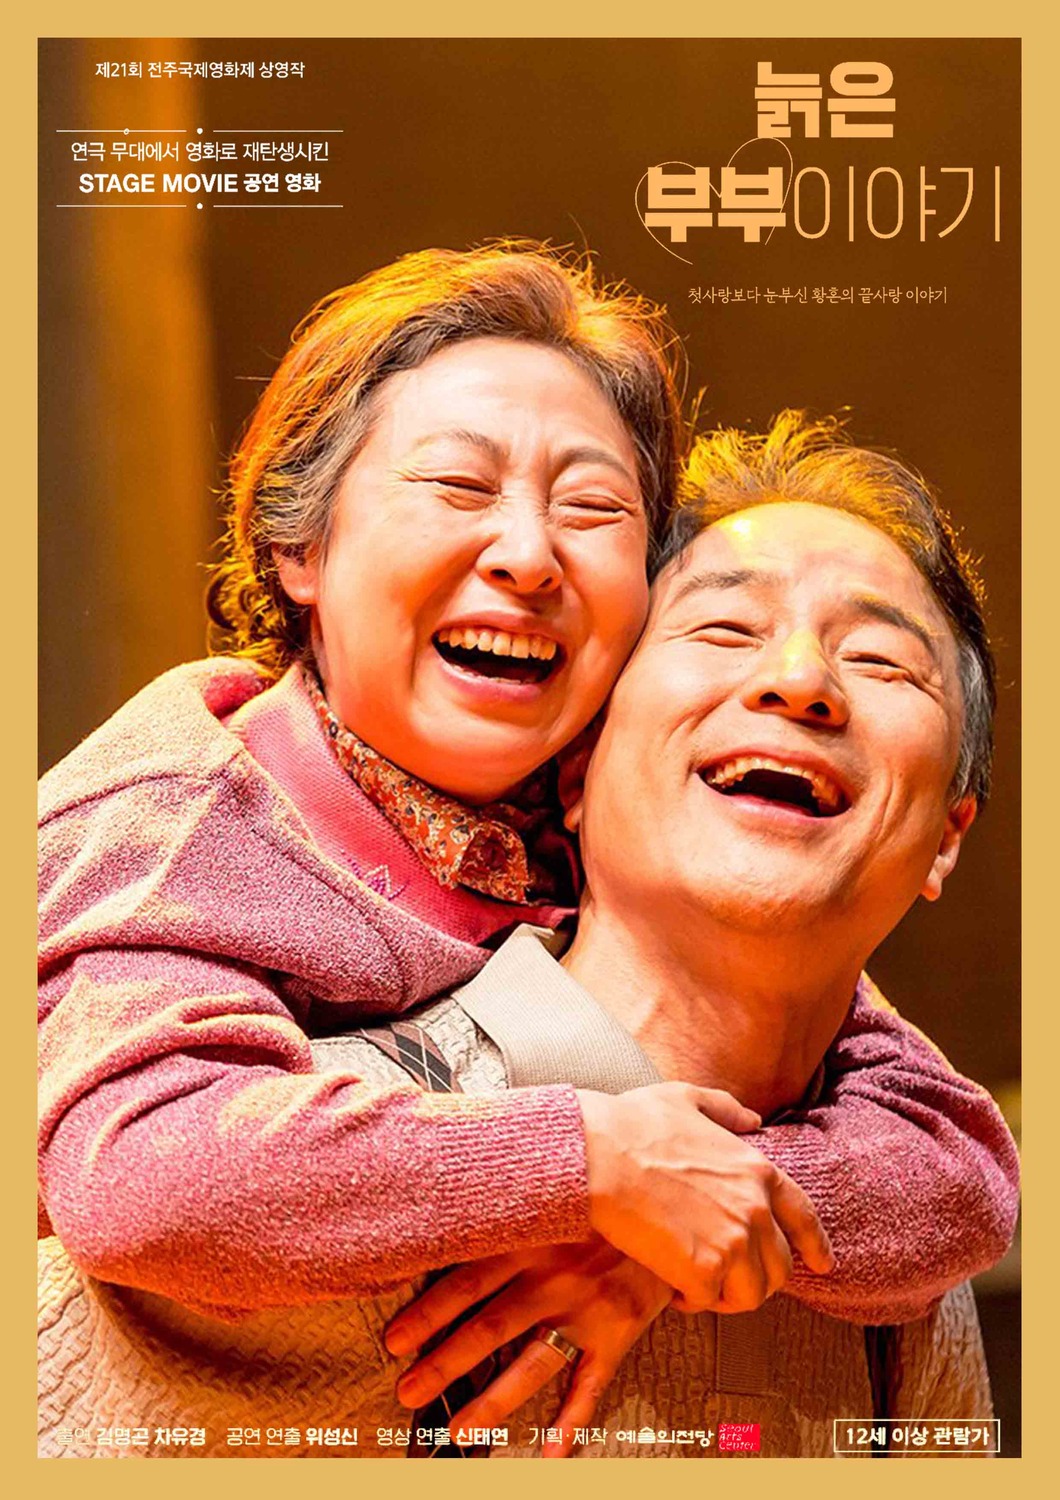 Extra Large Movie Poster Image for The Story of an Old Couple: Stage Movie 